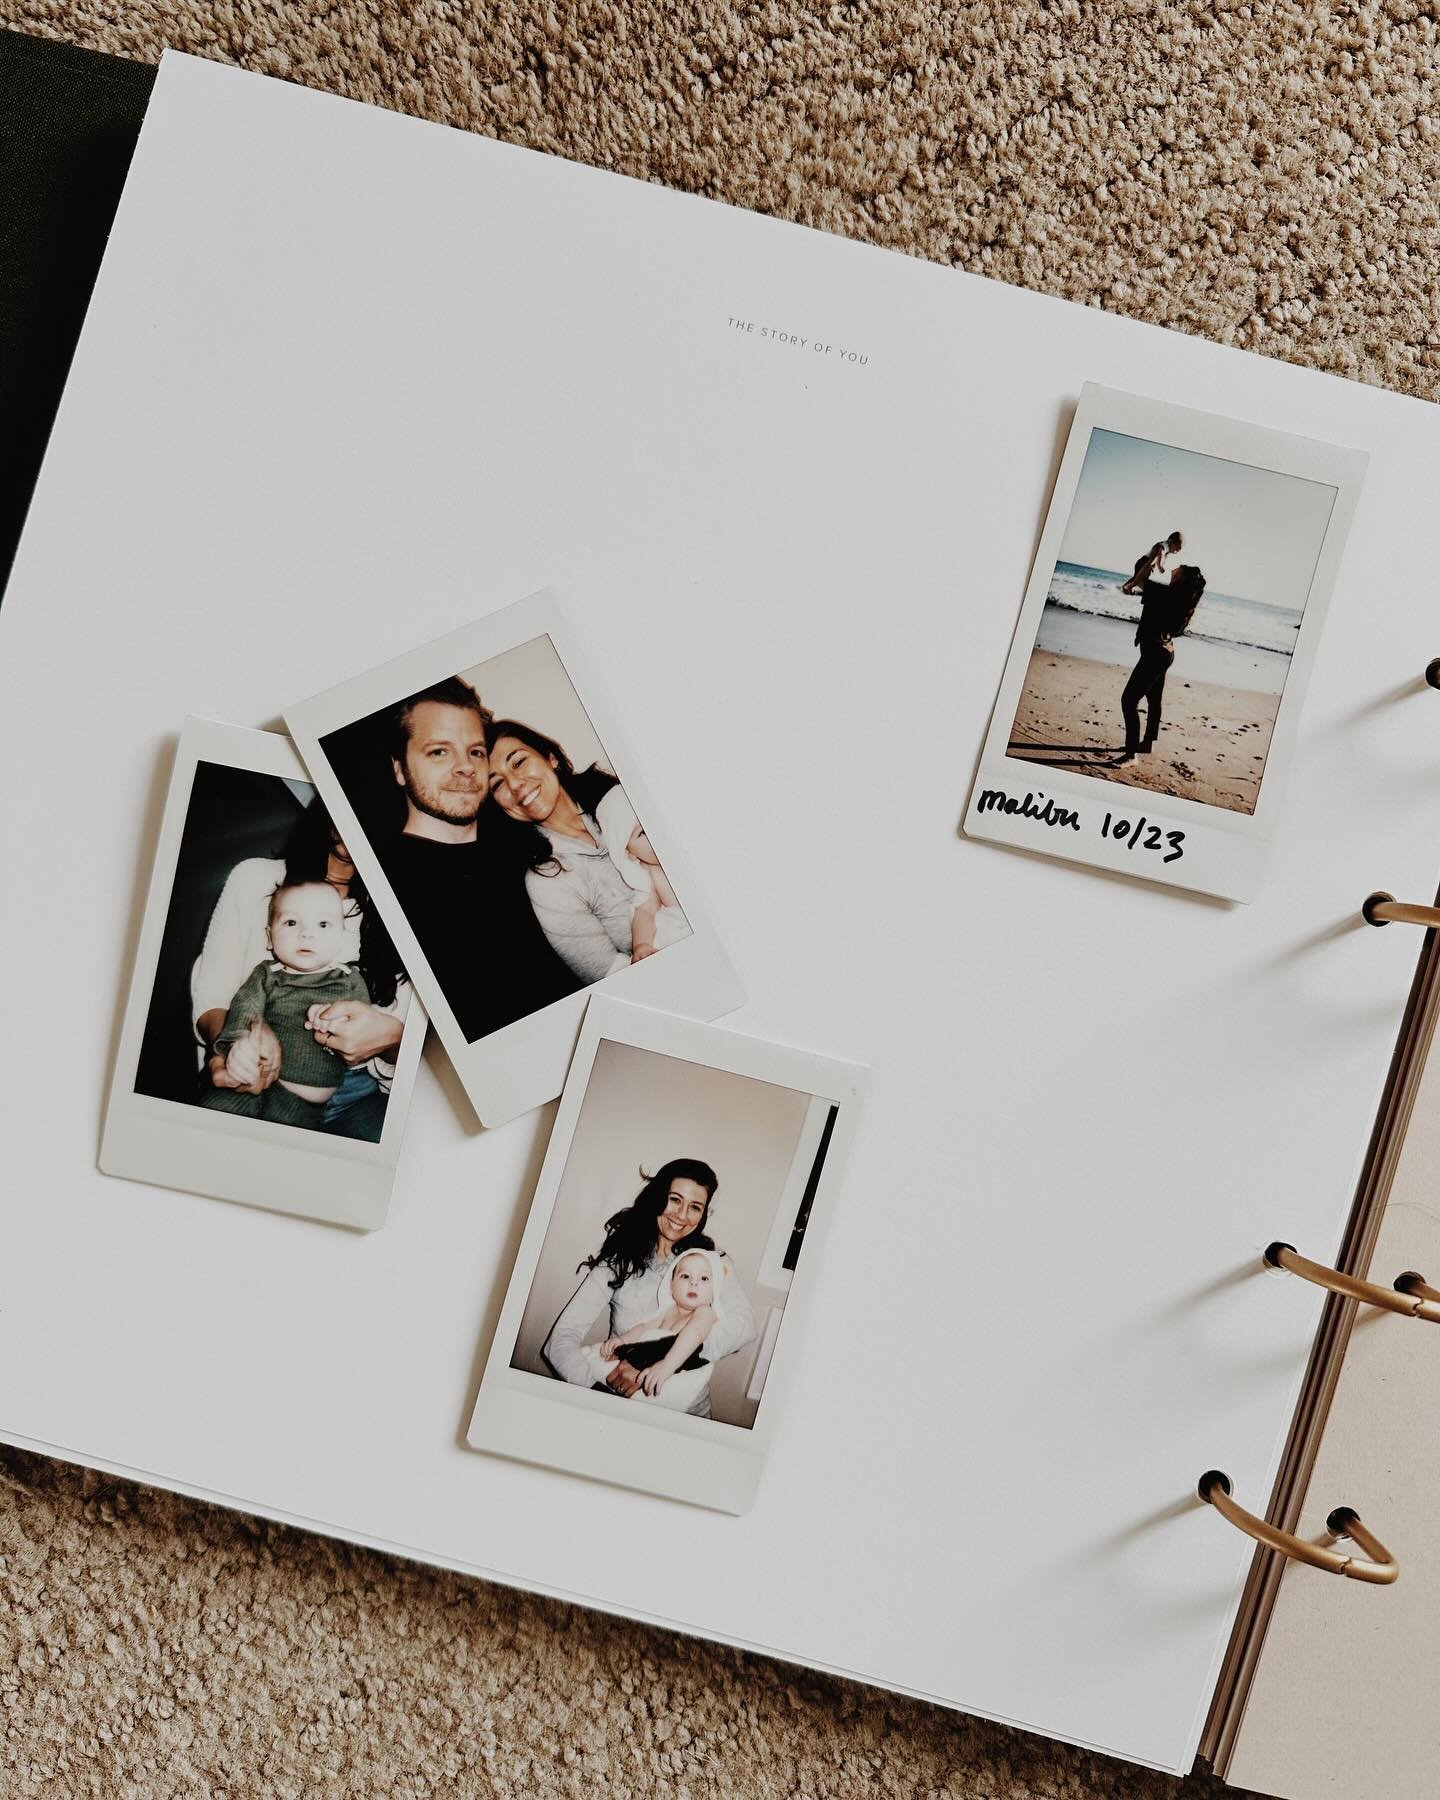 A new installment of Three Things is on the blog today! This is where I share three of my favorite things I&rsquo;m loving right now, including the most amazing baby book I found for Oliver&rsquo;s first year of life. And yes I share other things tha